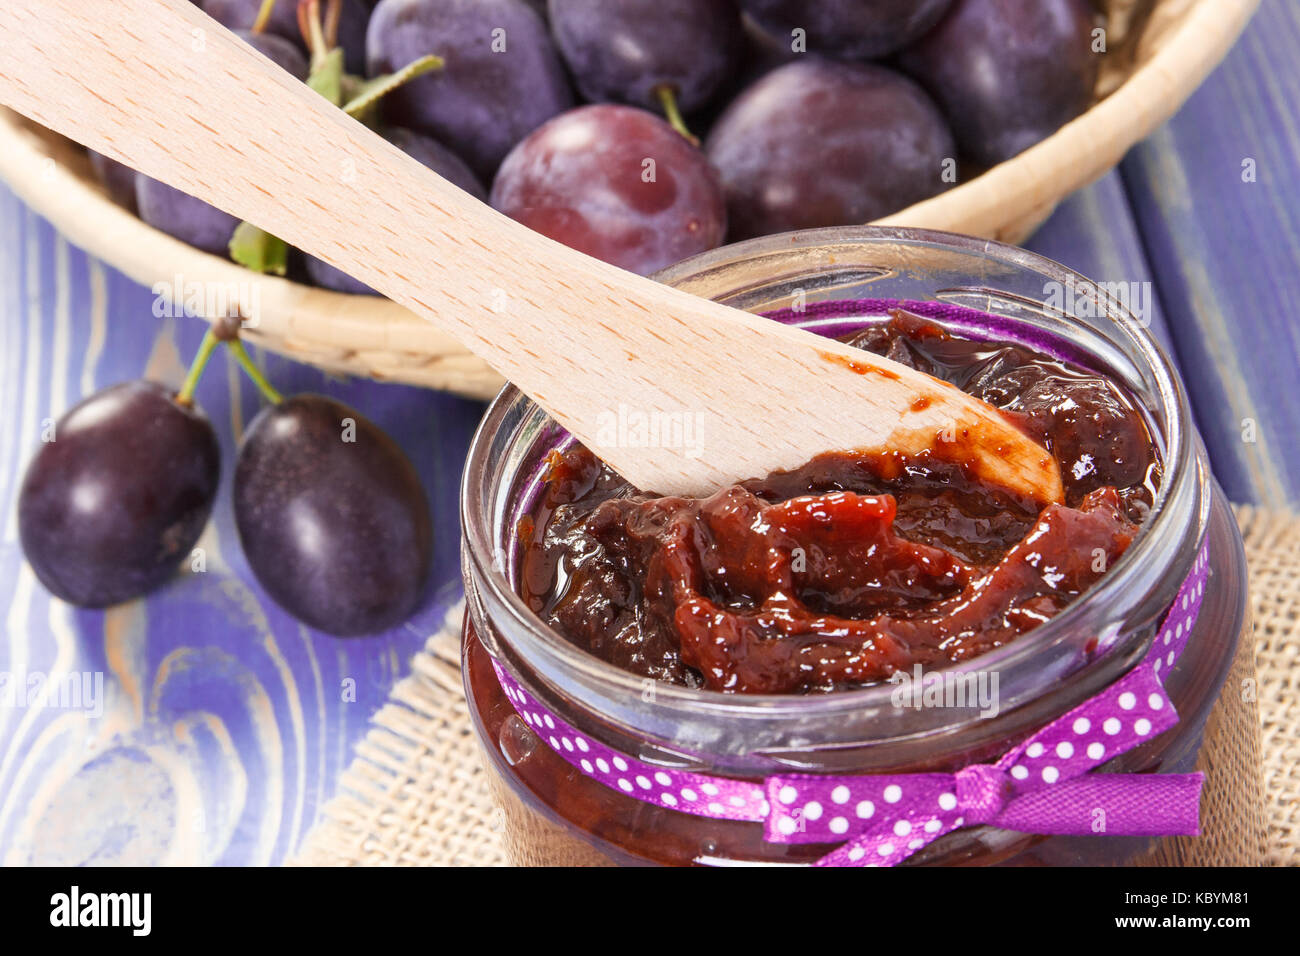 Wooden knife and homemade plum marmalade or jam in glass jar, concept of healthy sweet snack, dessert or breakfast Stock Photo